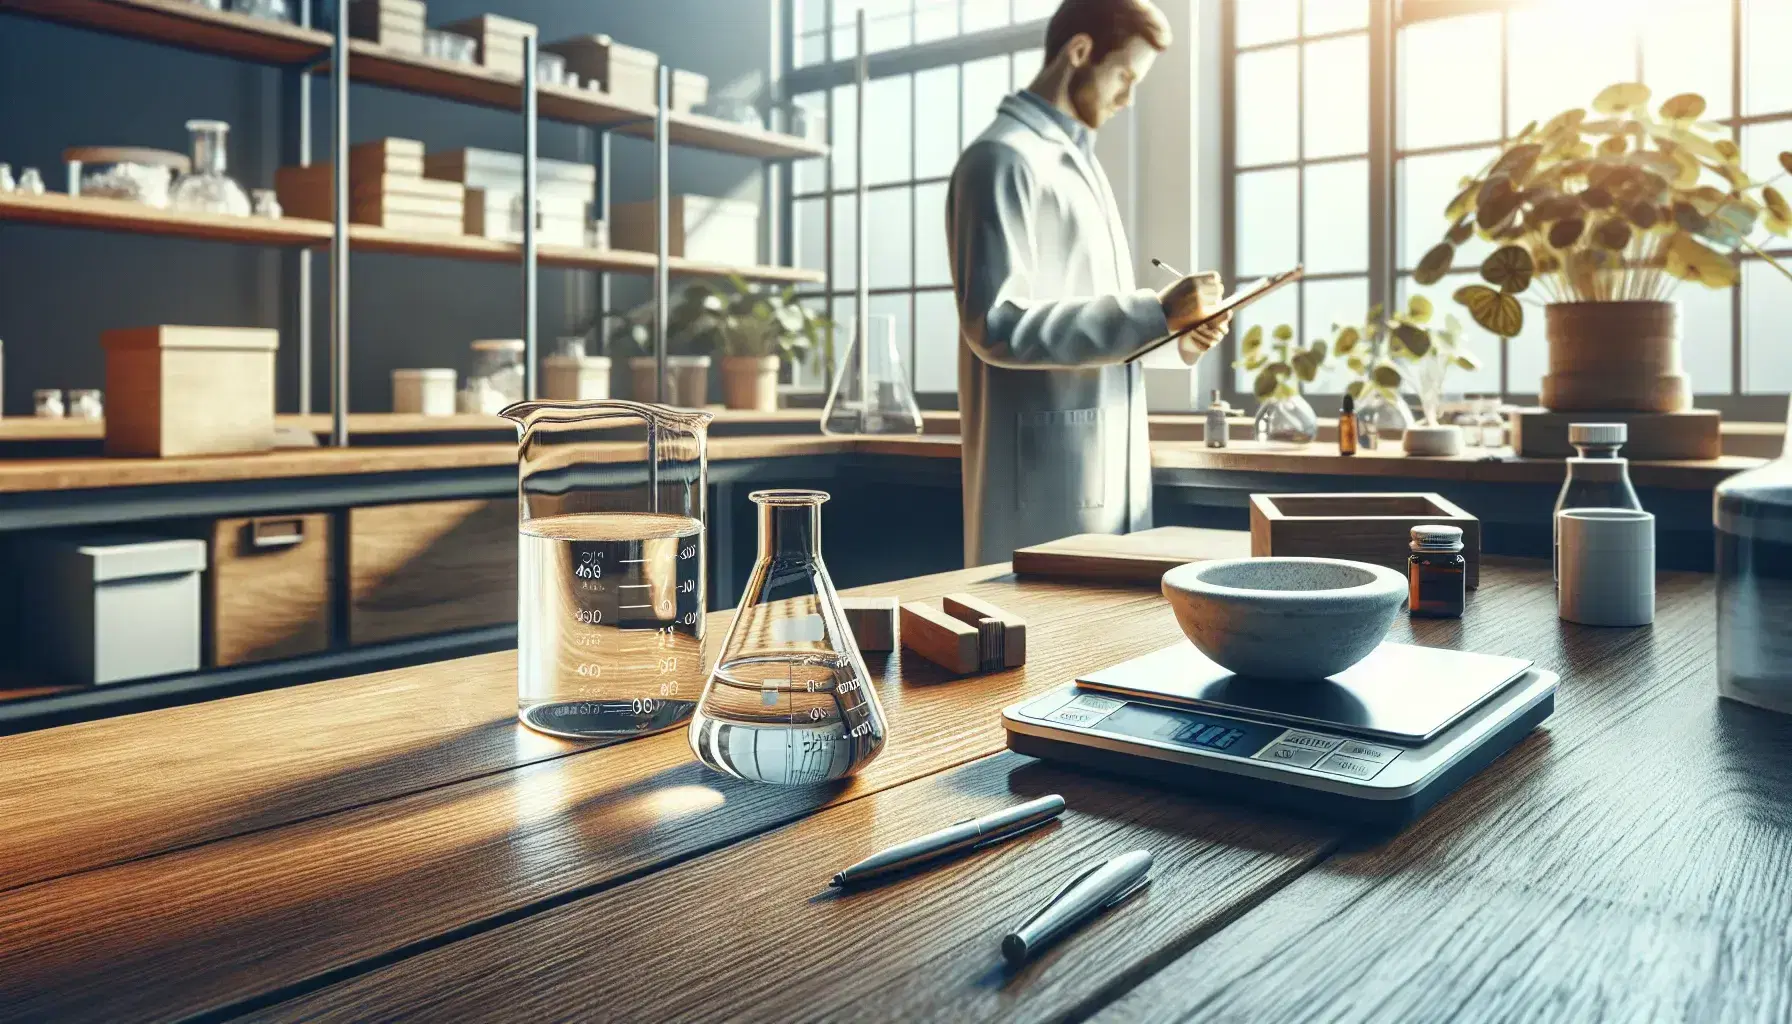 Scientific laboratory with wooden table, beaker with transparent liquid, flask with blue solution, mortar and scales, researcher from behind and plant on the windowsill.